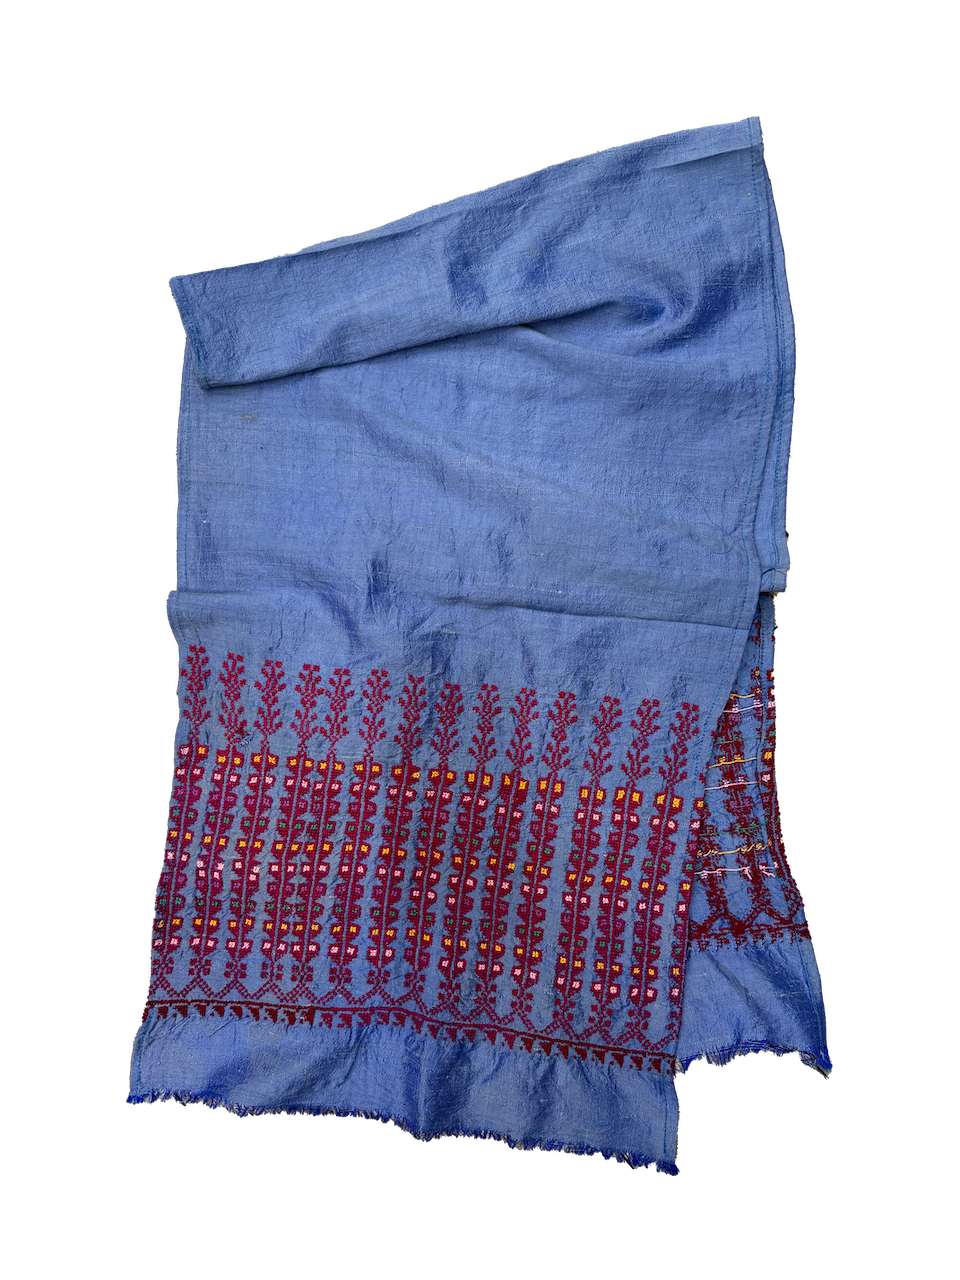 The Embroidered Scarf in Blue Thai Silk